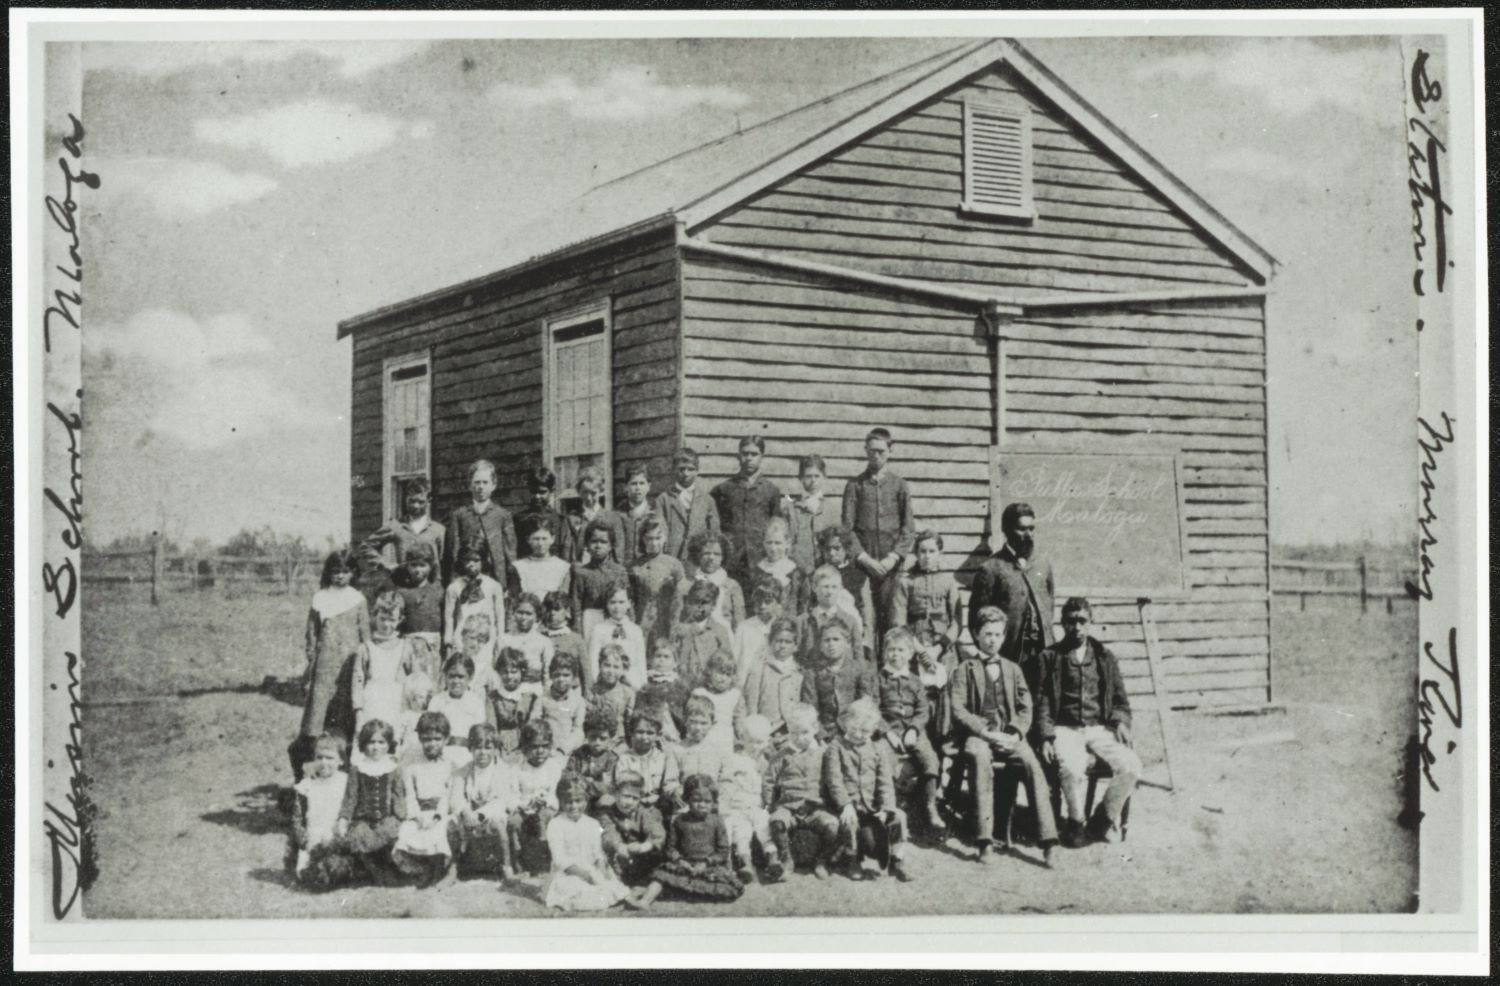 An outdoor class photo of students and their teacher in front of a small wooden school building